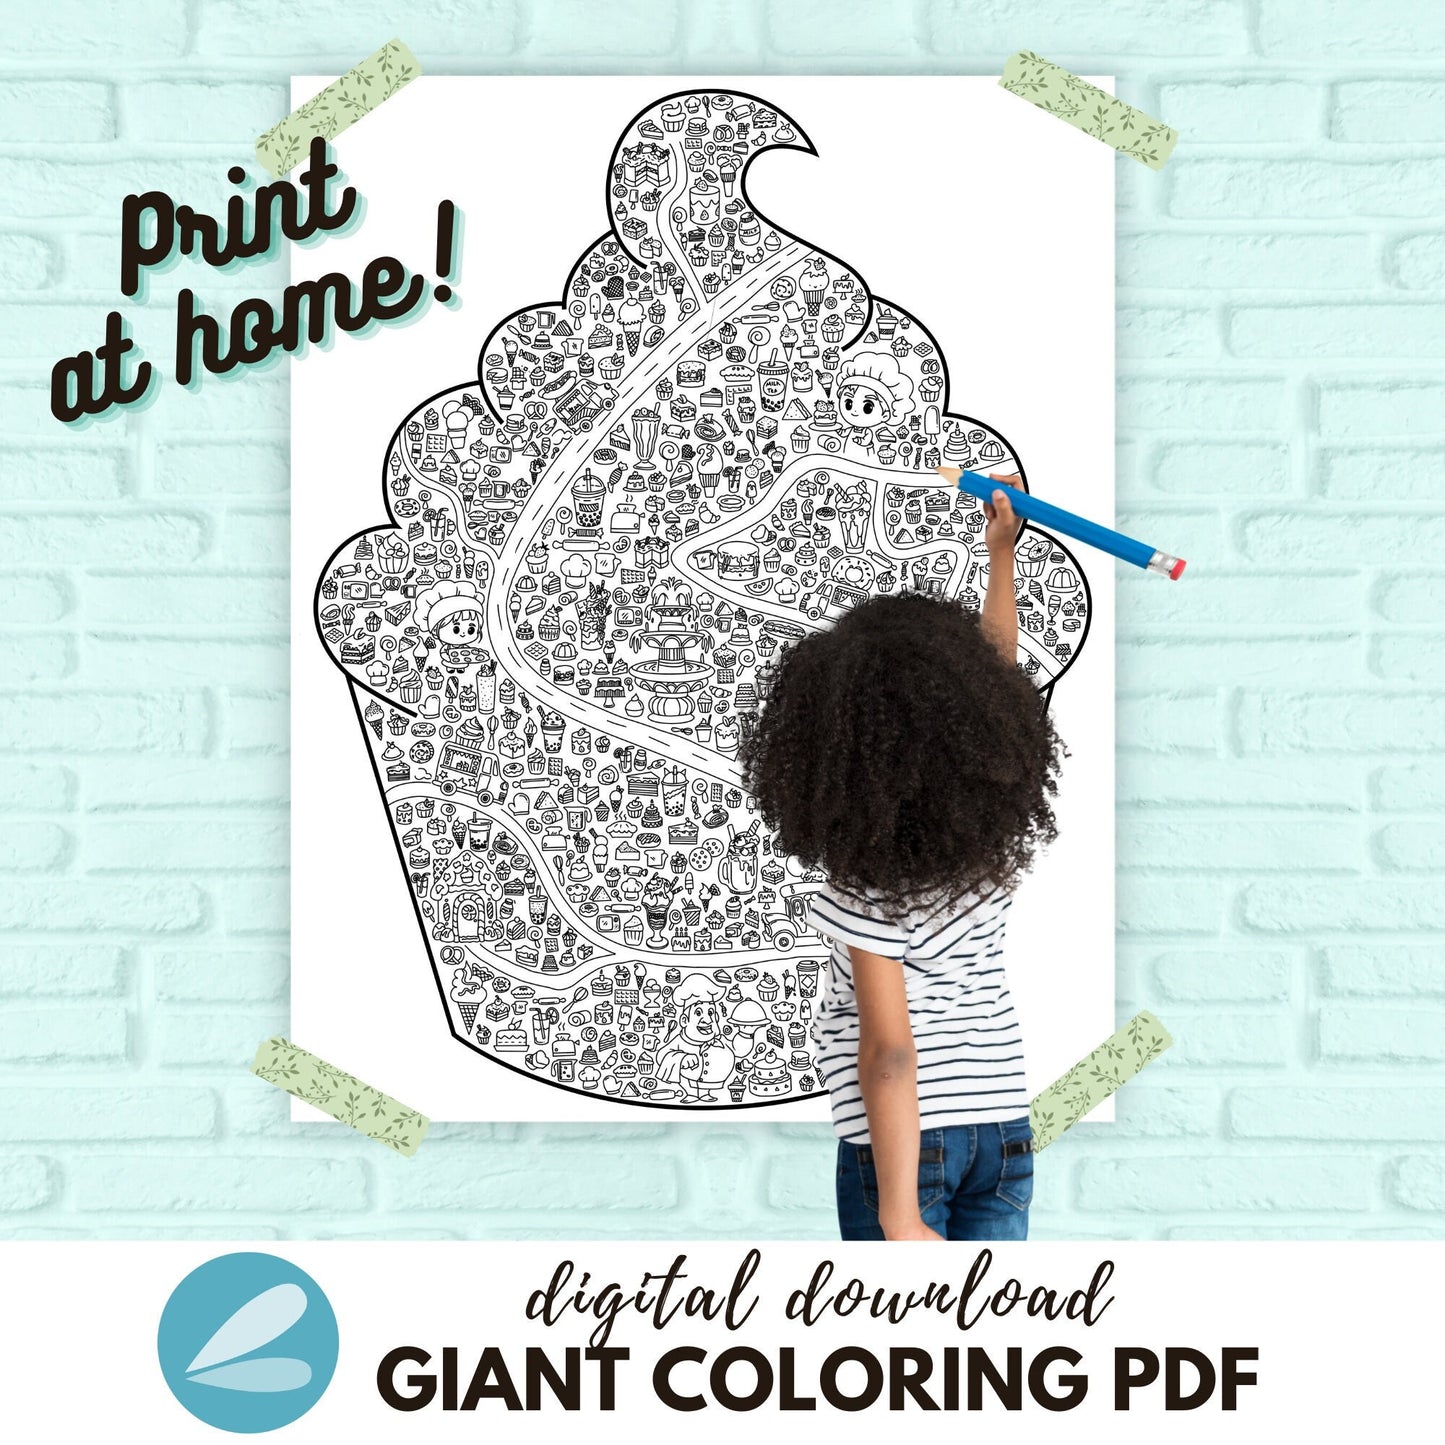 GIANT Birthday Cupcake Coloring Page - Birthday Cupcake PDF - Instant Download